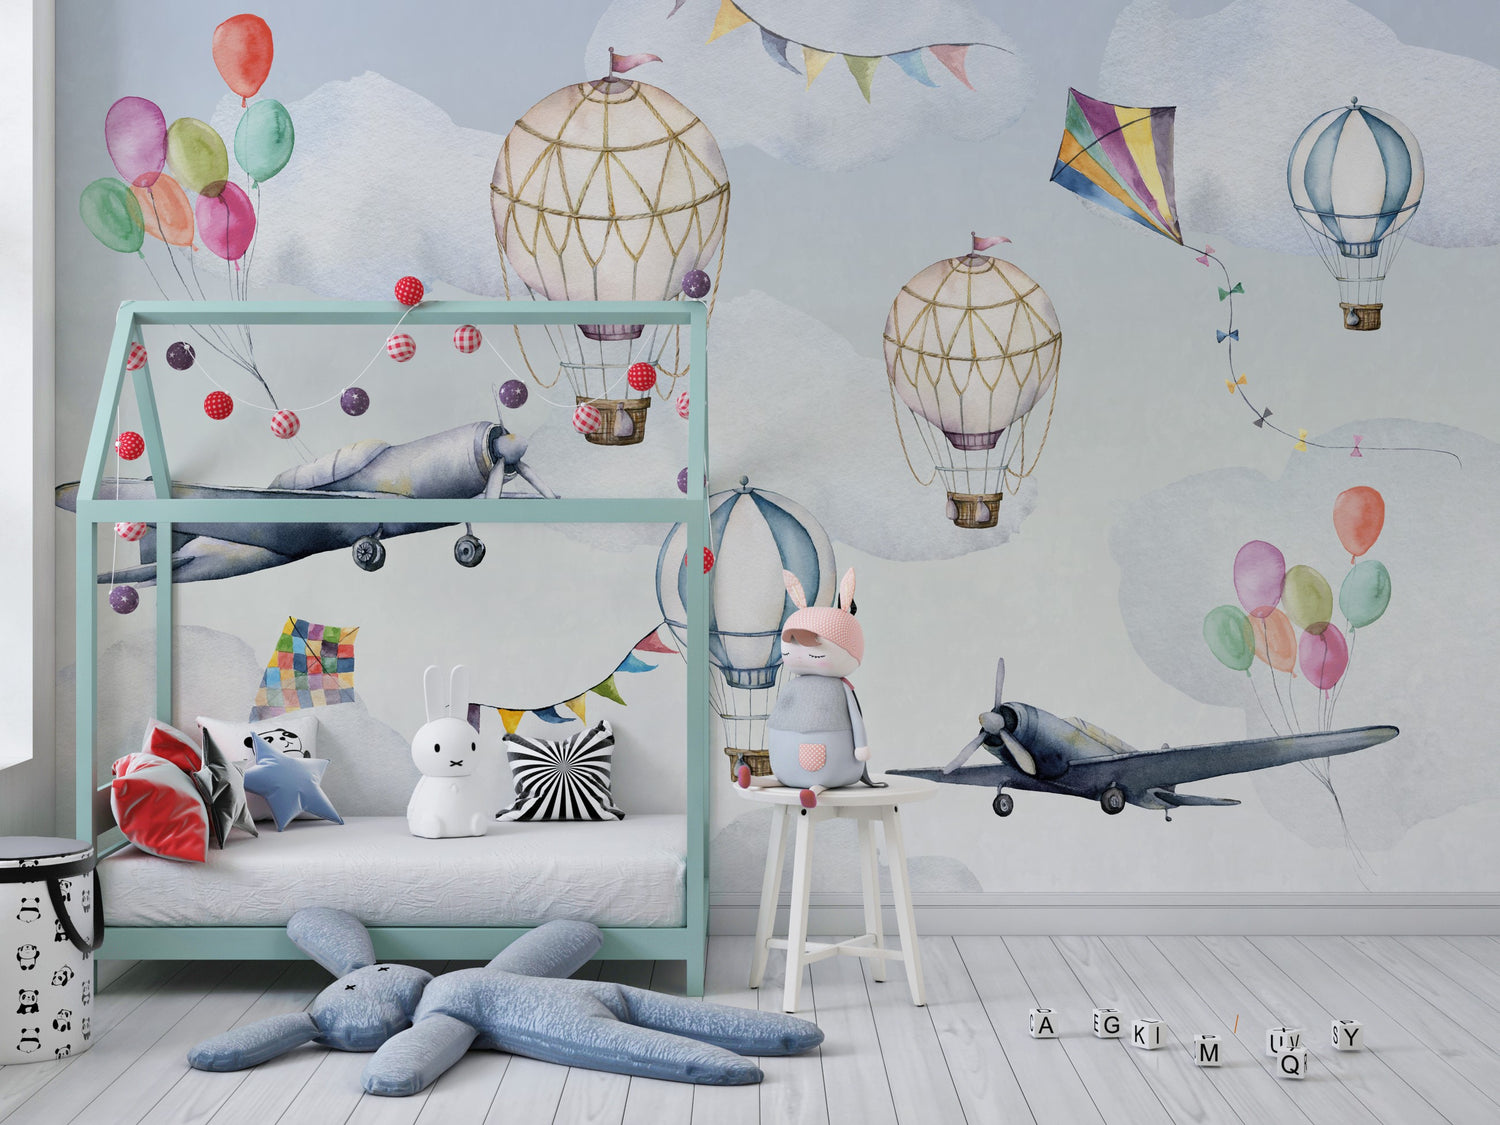 Hot Air Balloon Wallpaper, Clouds and Planes Mural